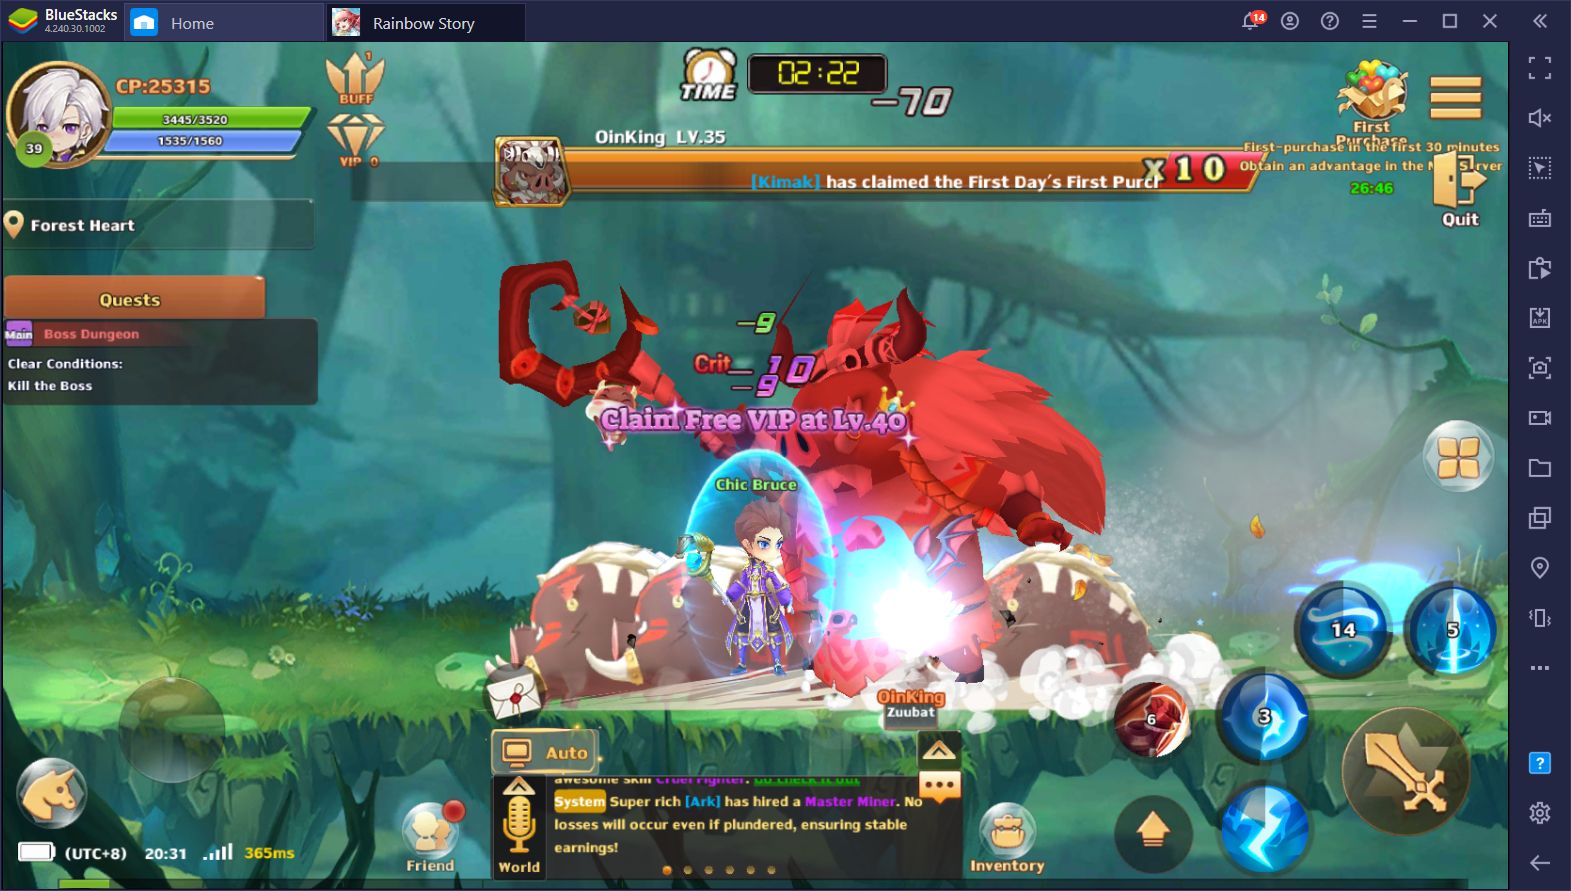 Rainbow Story - Enjoy This Sidescroller Fantasy MMORPG on PC With BlueStacks